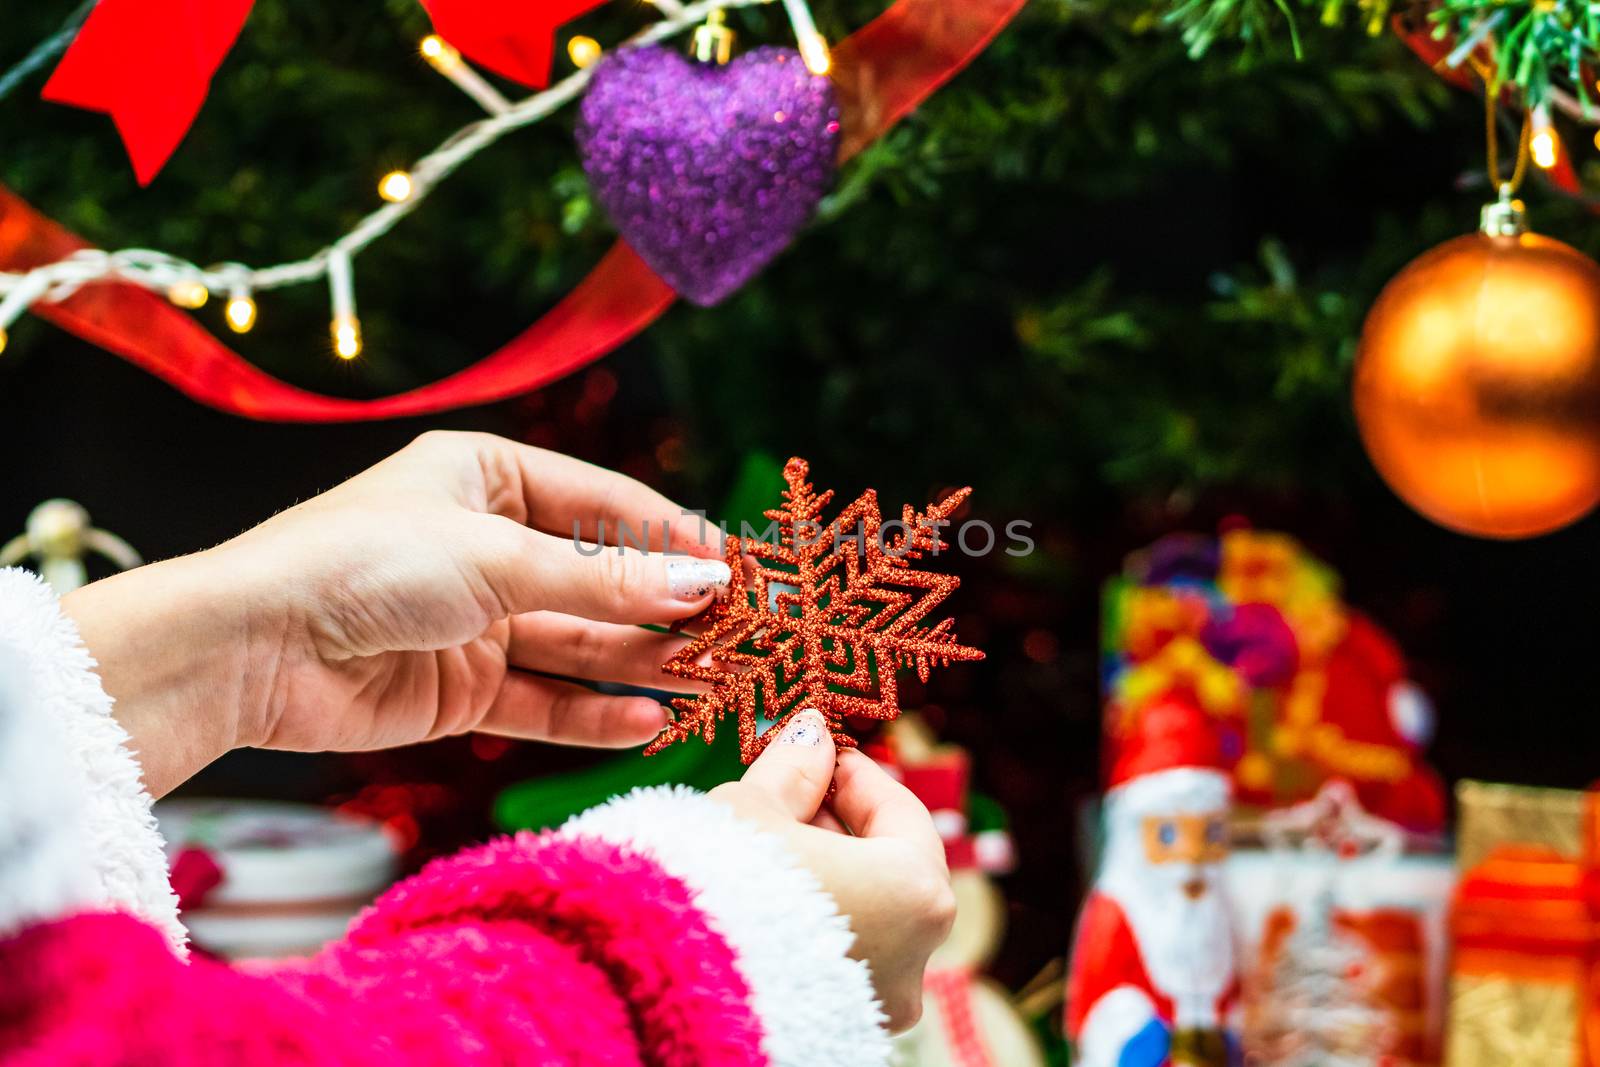 Hands holding Christmas ornament in front of Christmas tree. Dec by vladispas